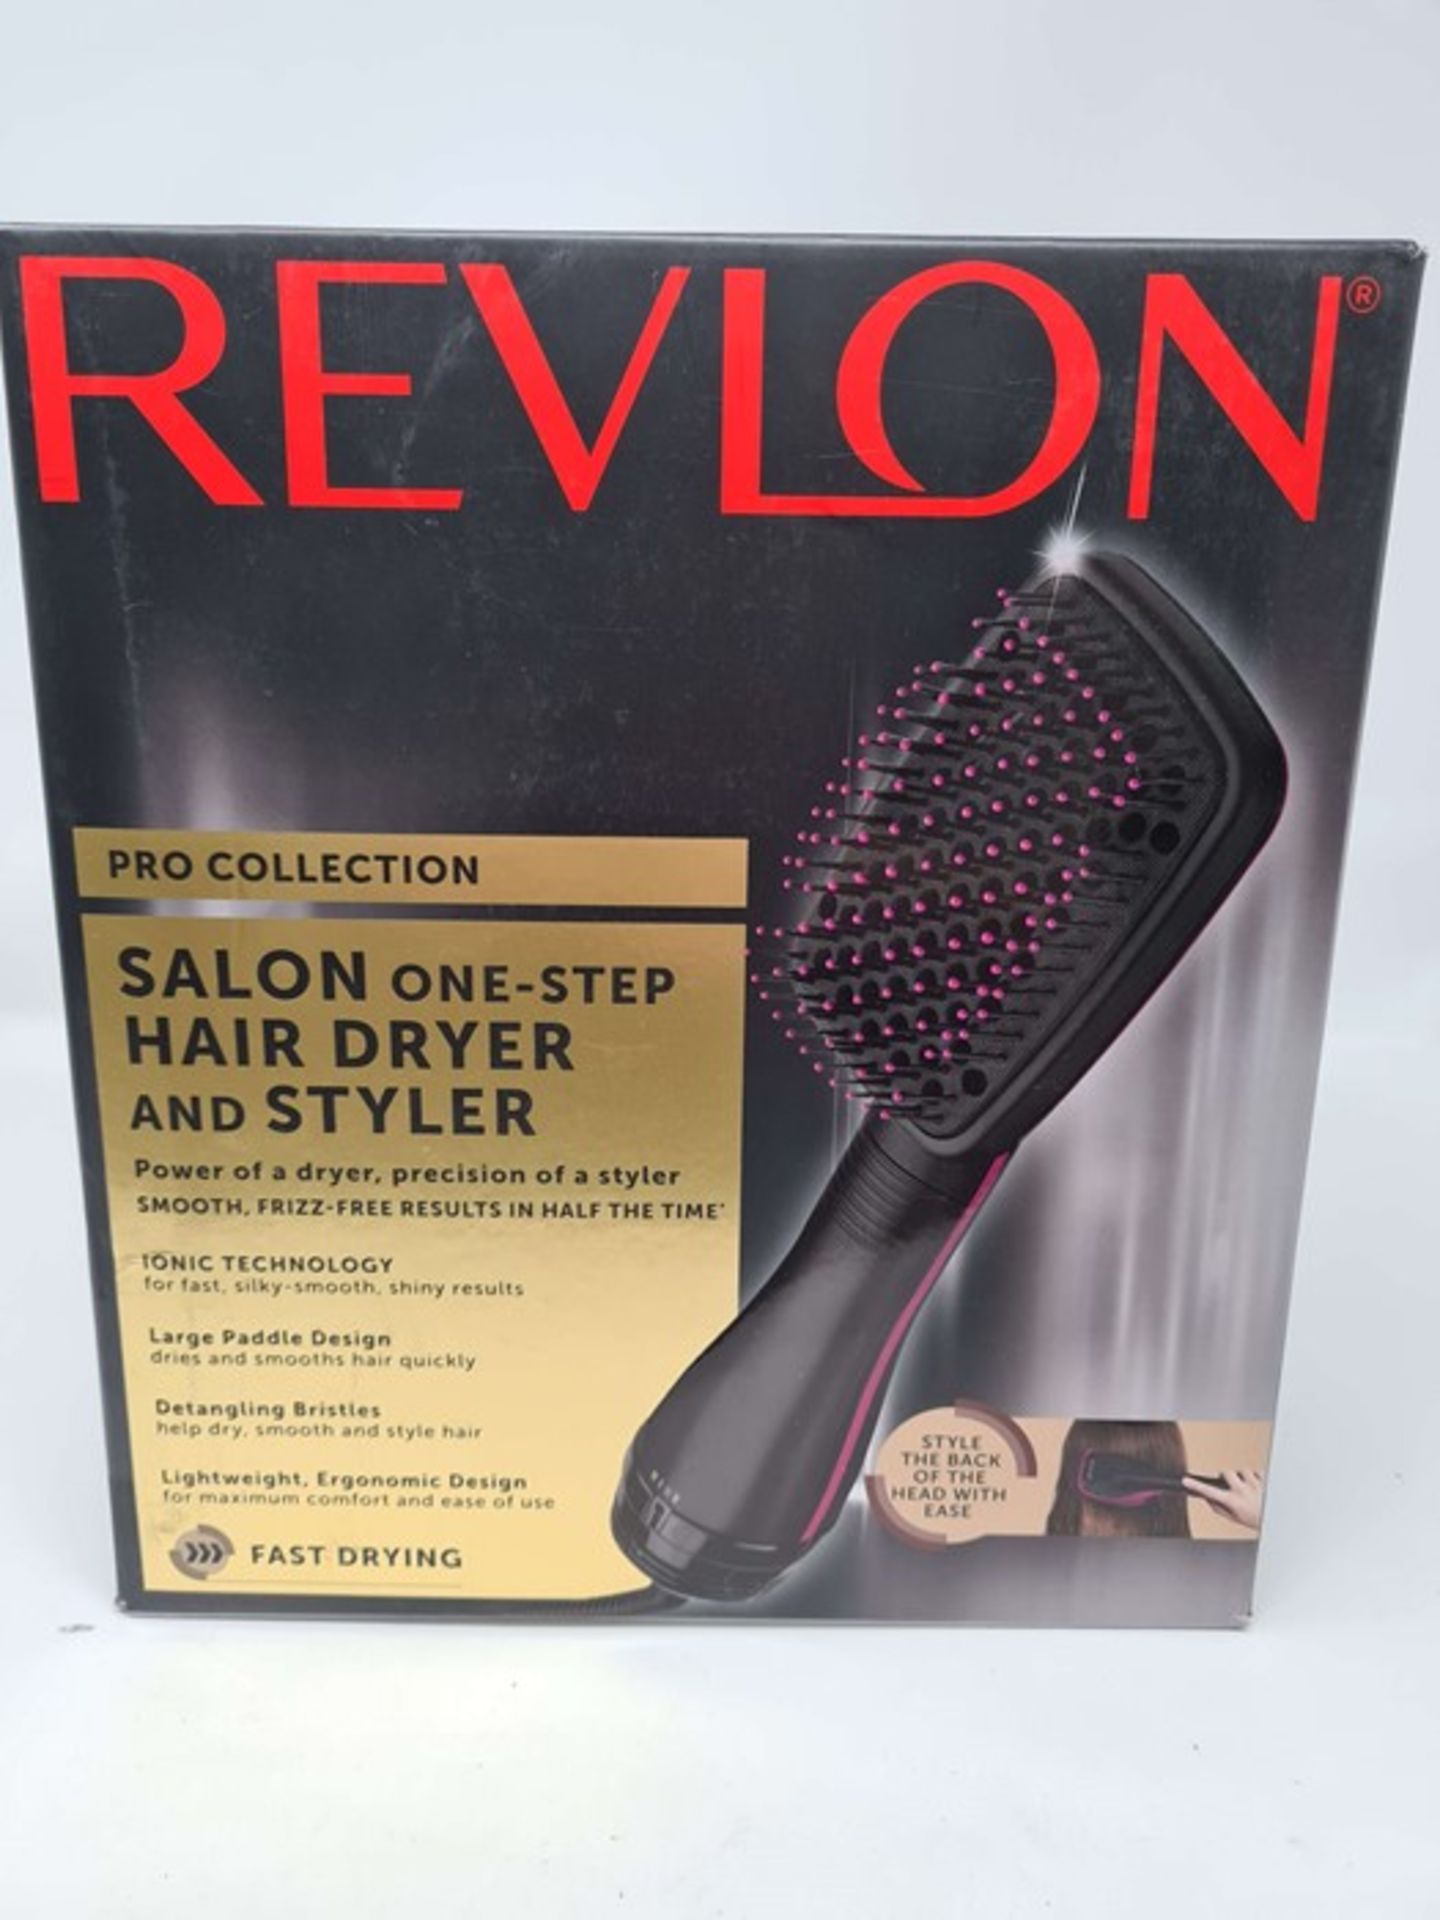 REVLON Pro Collection Salon One Step Hair Dryer - Image 2 of 2